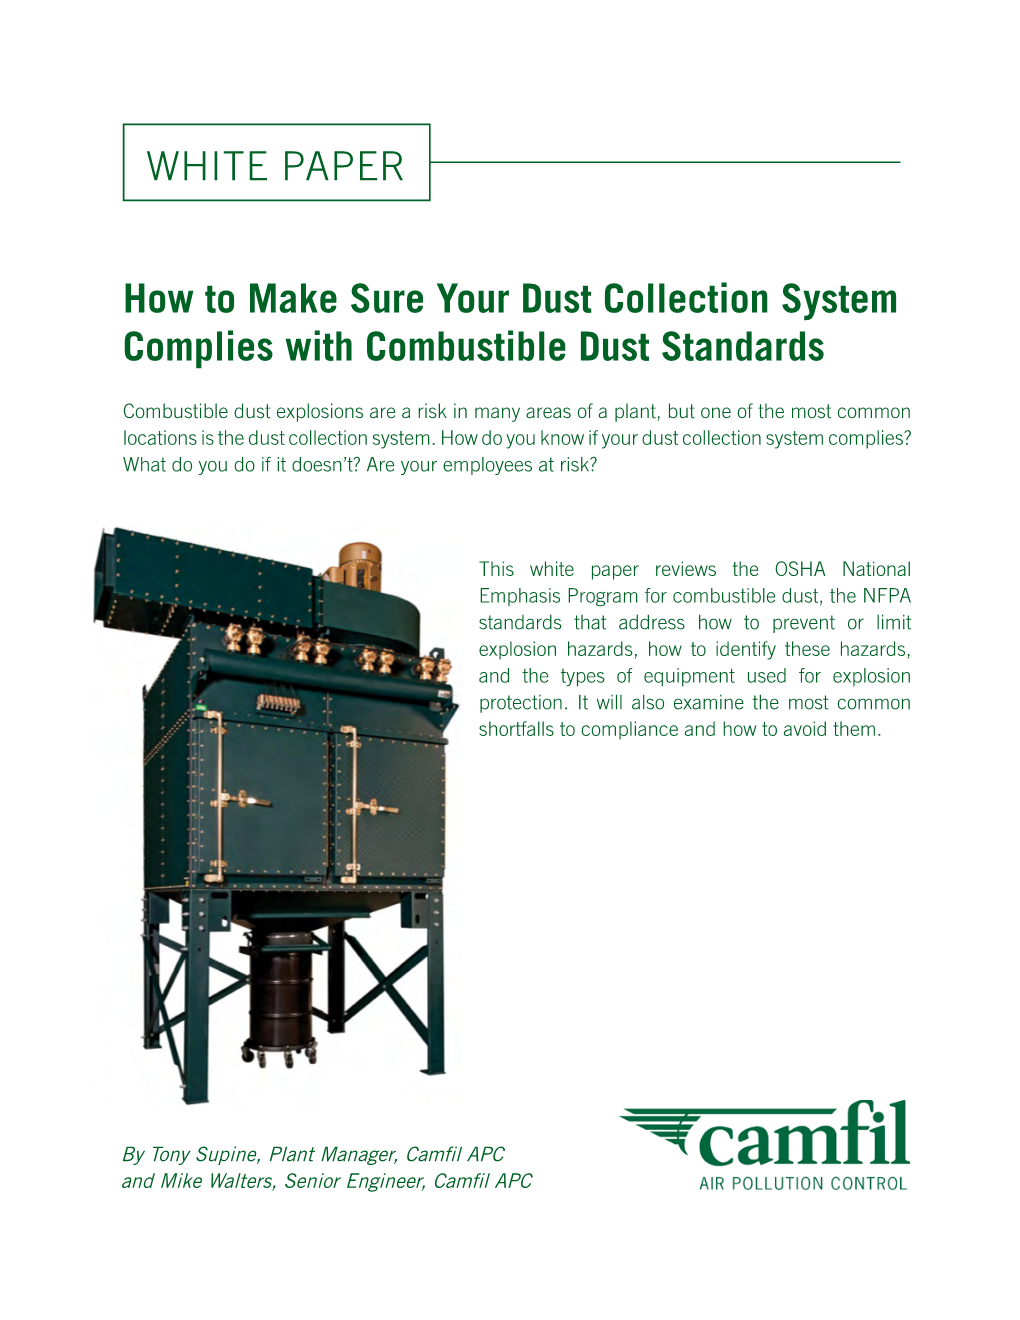 How to Make Sure Your Dust Collection System Complies with Combustible Dust Standards